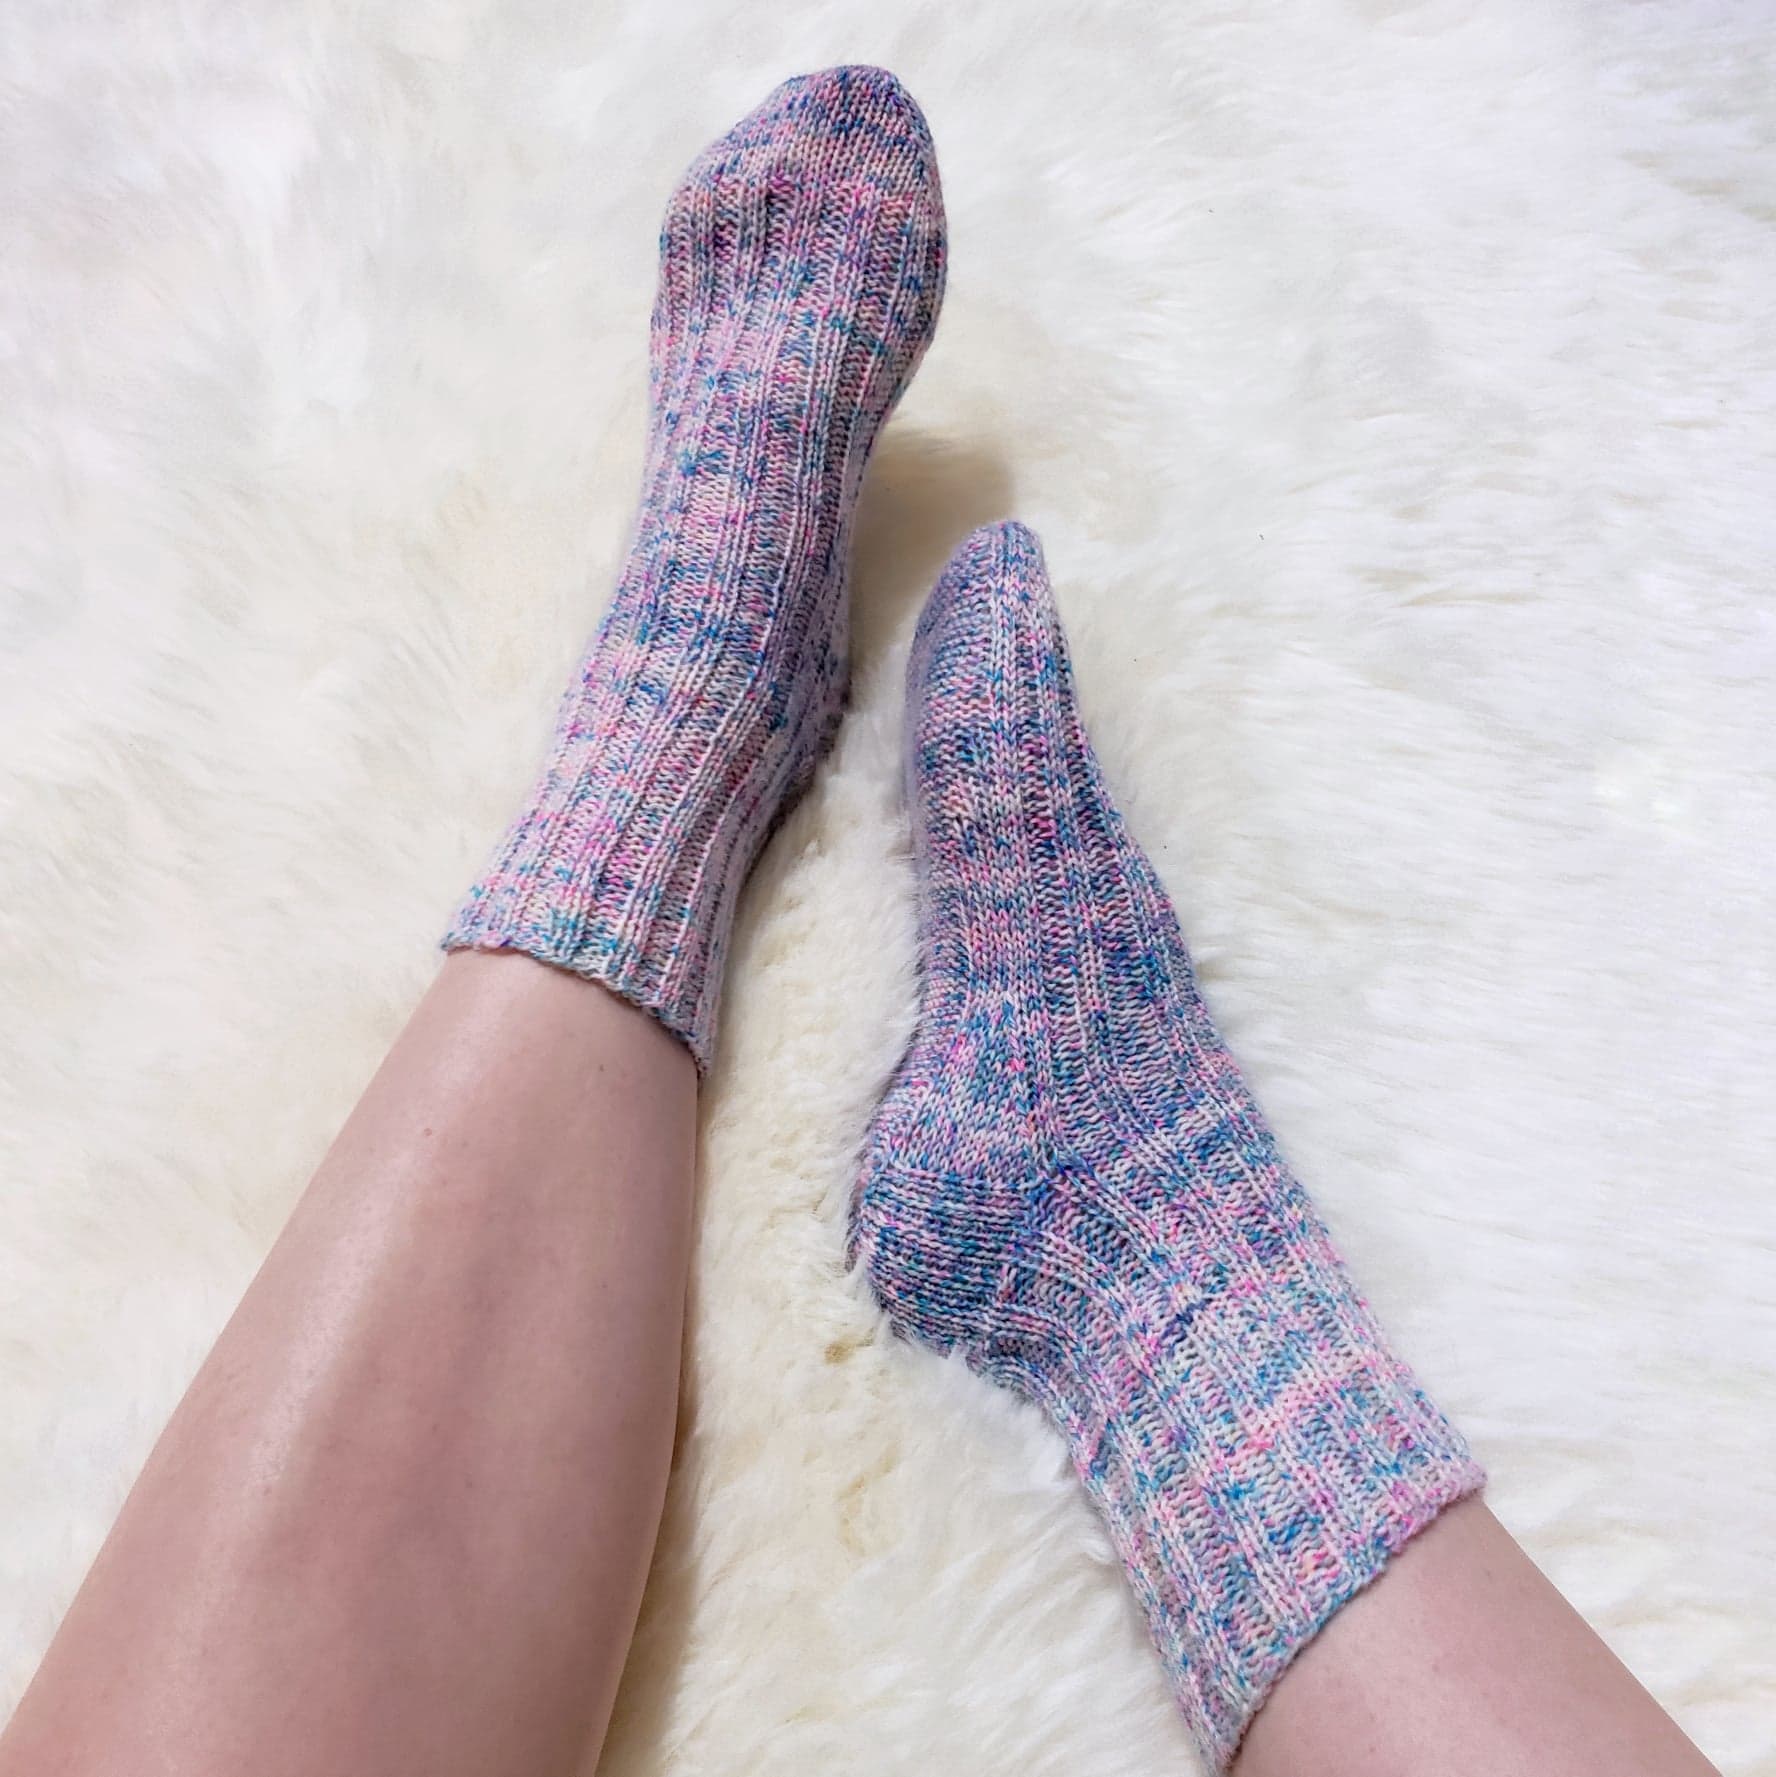 Knitting pattern: Socks for wide or swollen feet and ankles - Payhip